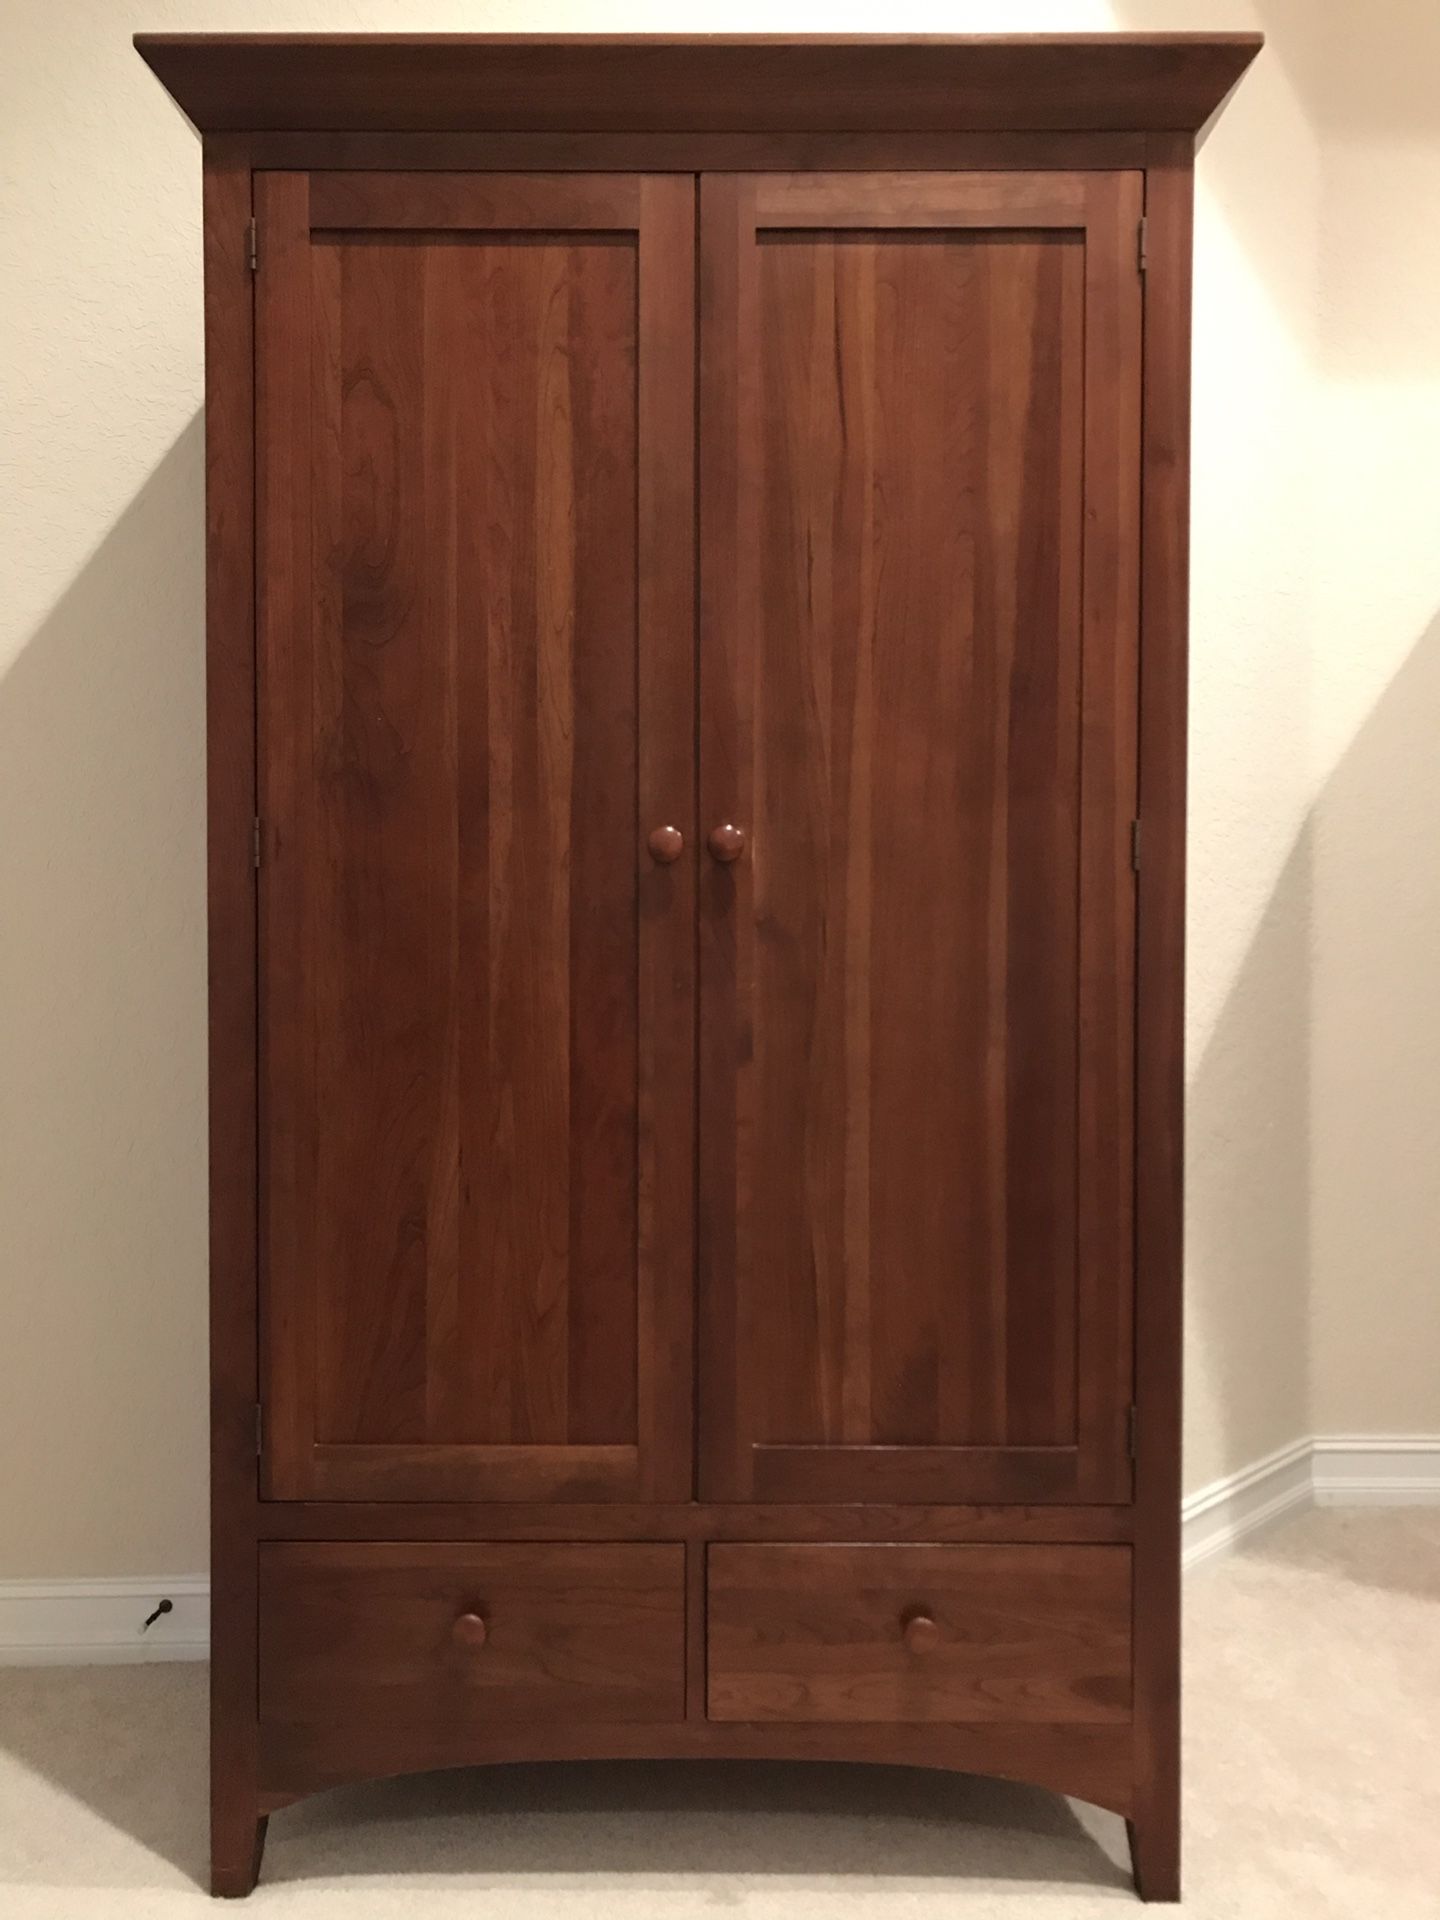 Ethan Allen Cherry Wood Armoire for Sale!